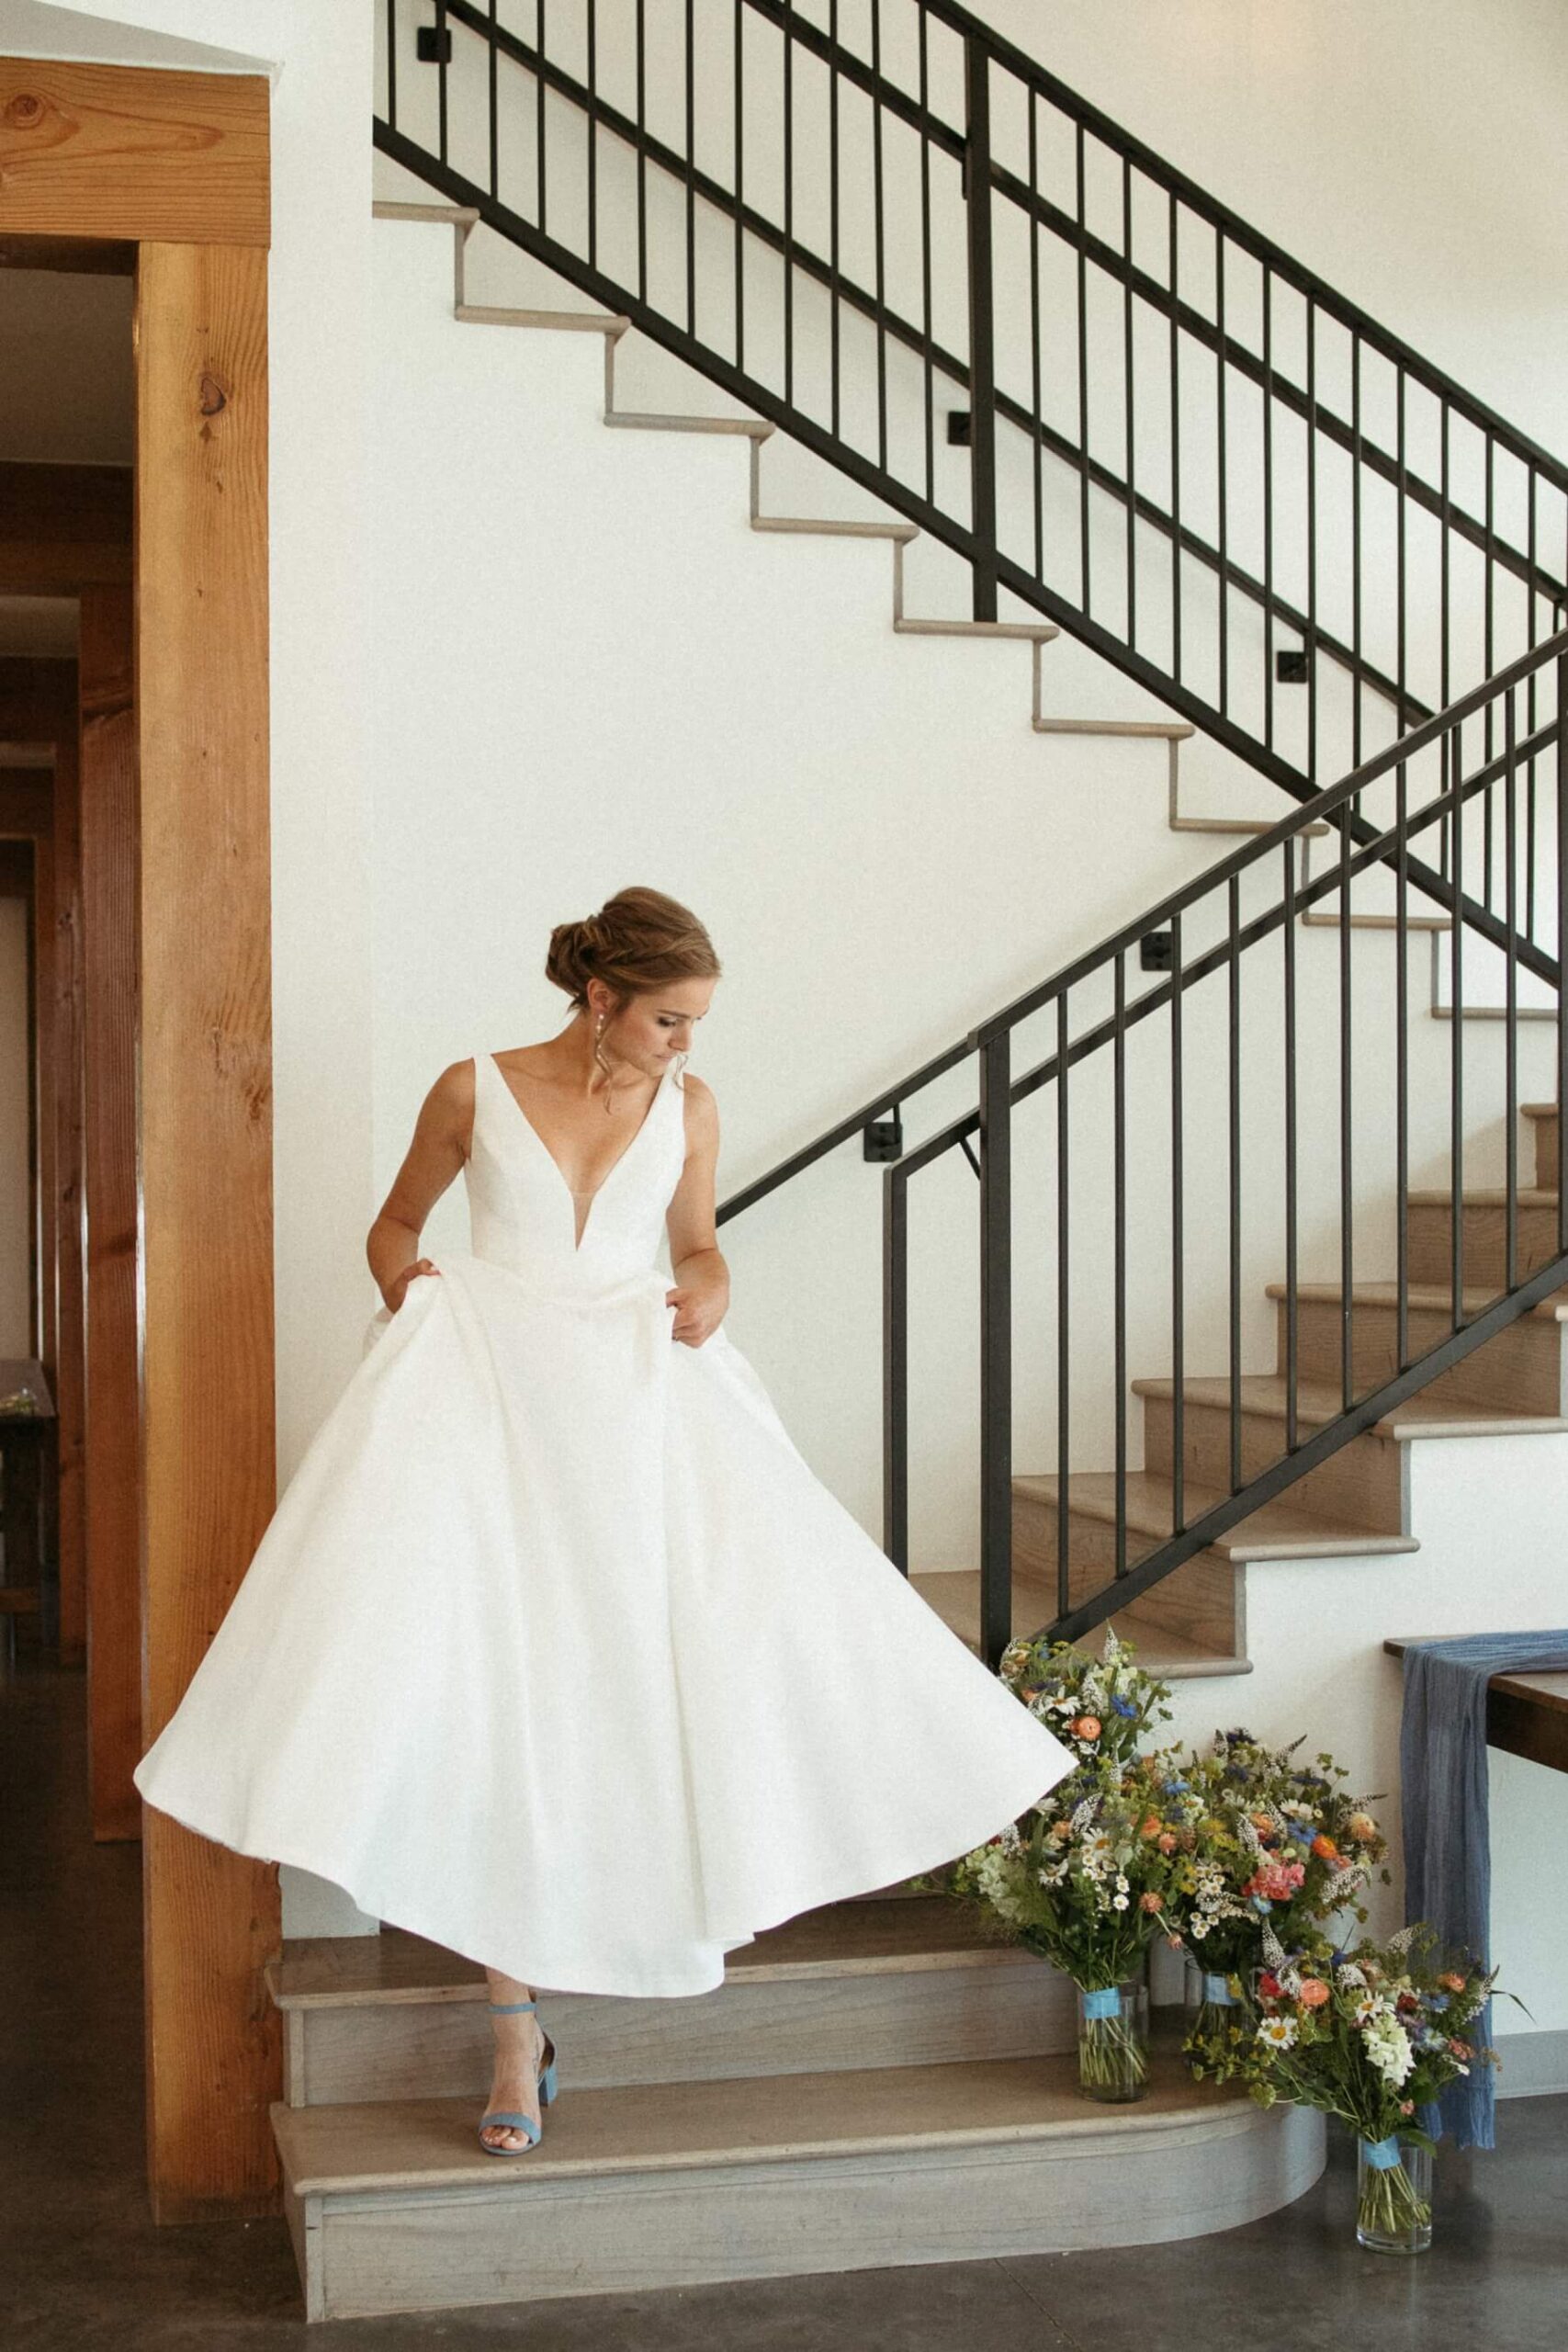 Bride walking down the stairs at North Star Gatherings, a Colorado mountain wedding venue